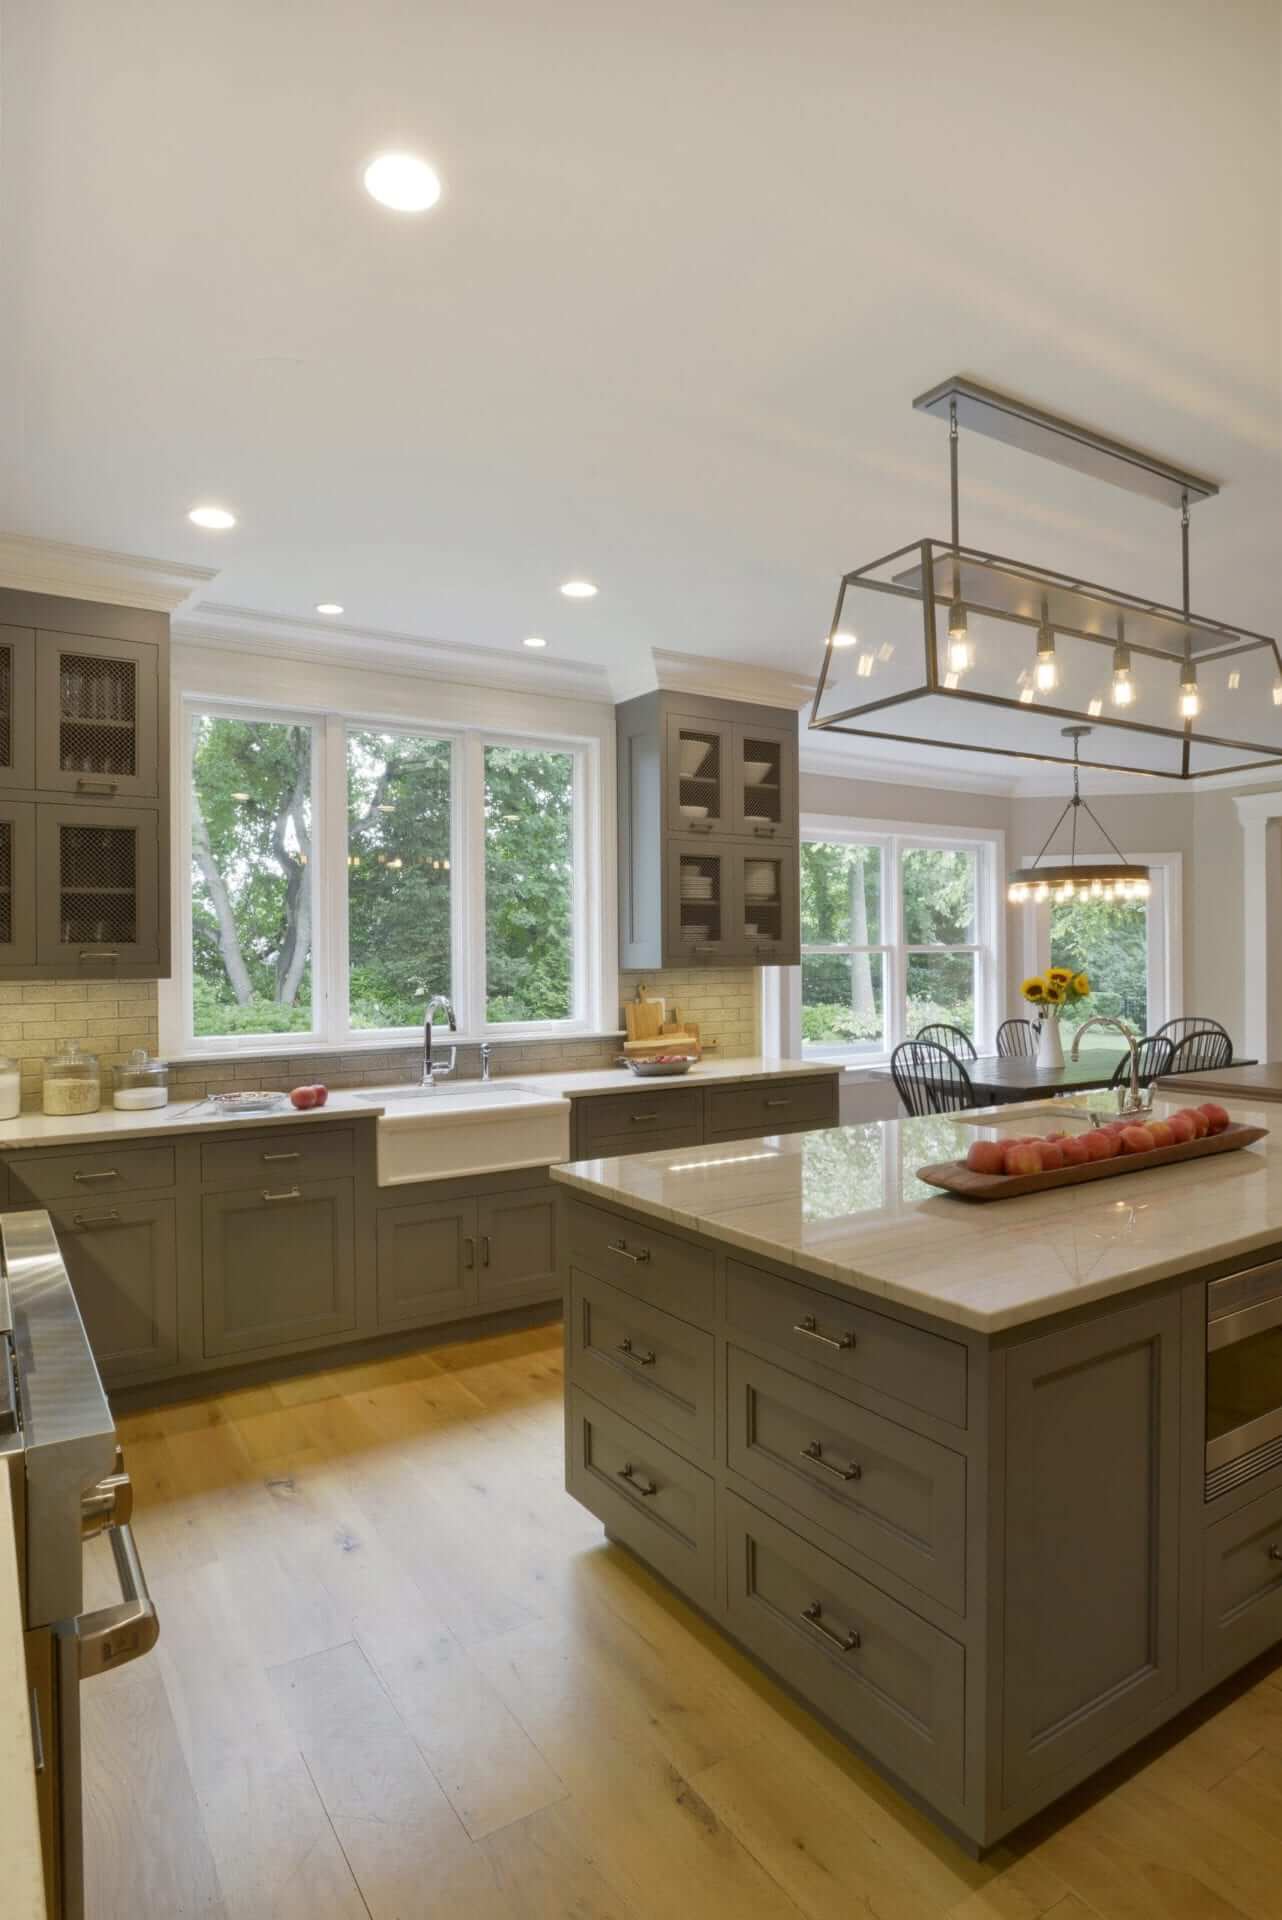 White Macambas Caesarstone topped gray Bilotta island is central in this Country kitchen.